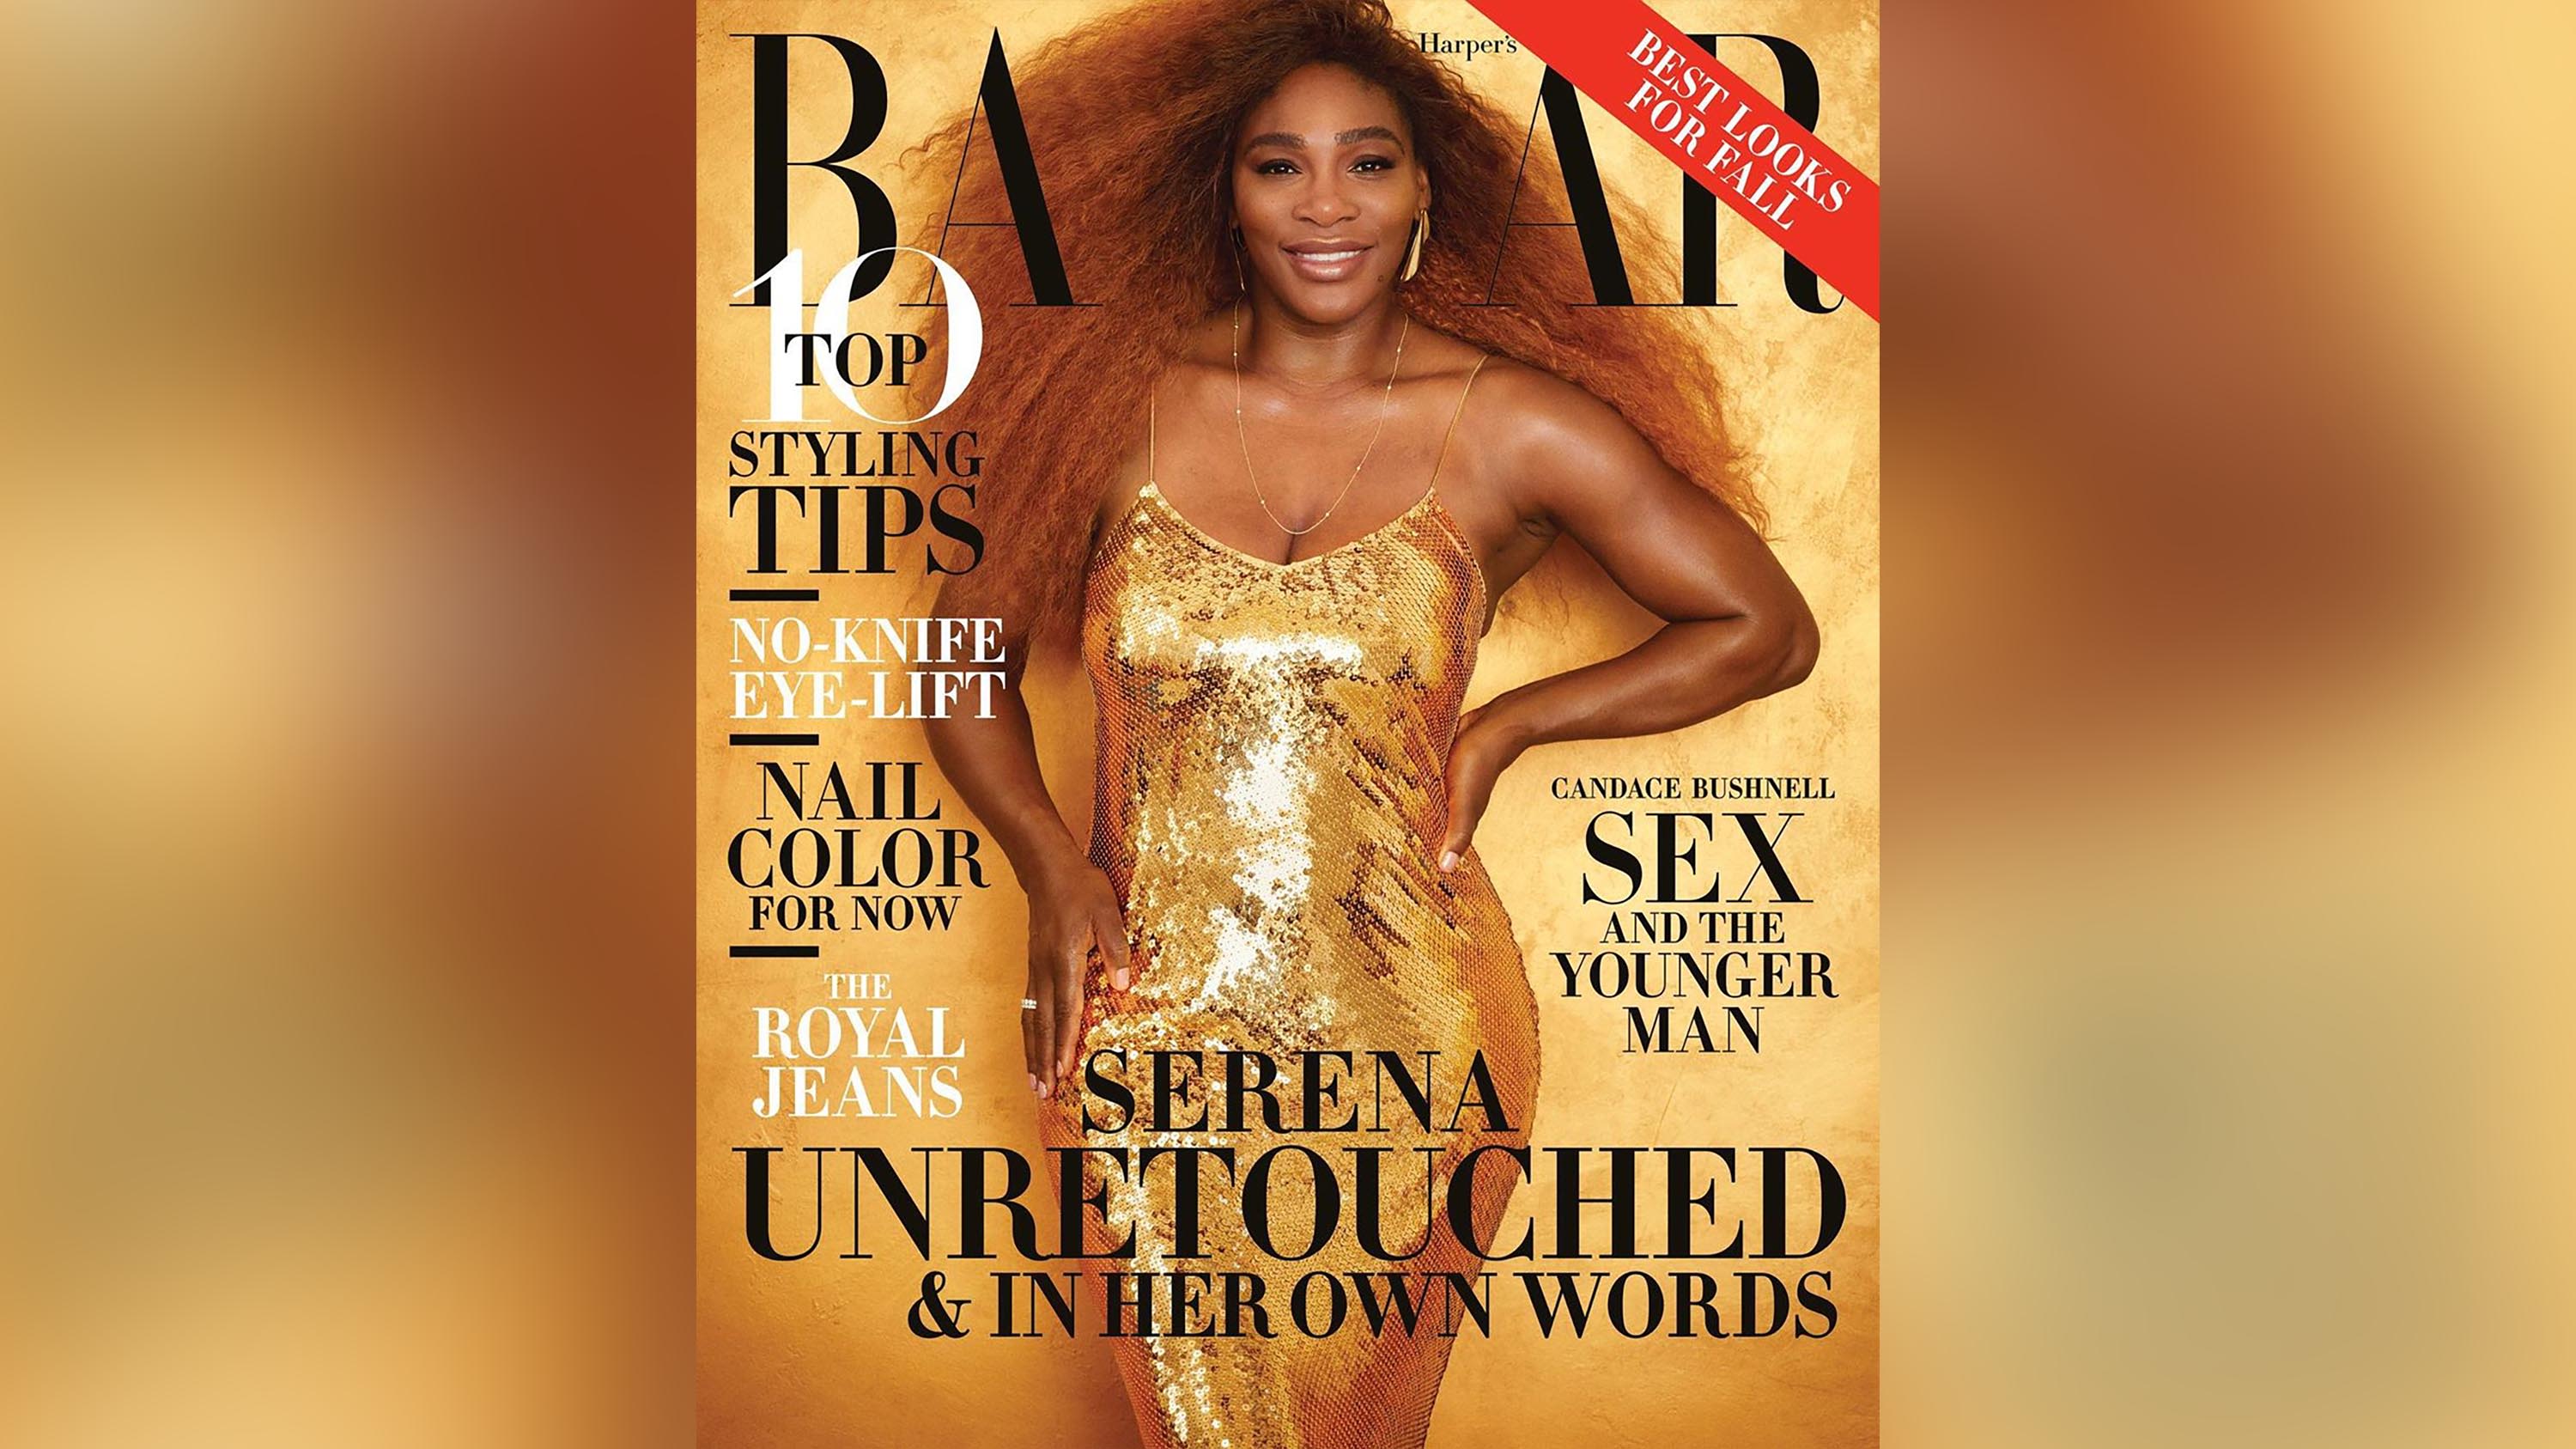 Serena Williams' unretouched cover photos for Harper's Bazaar are